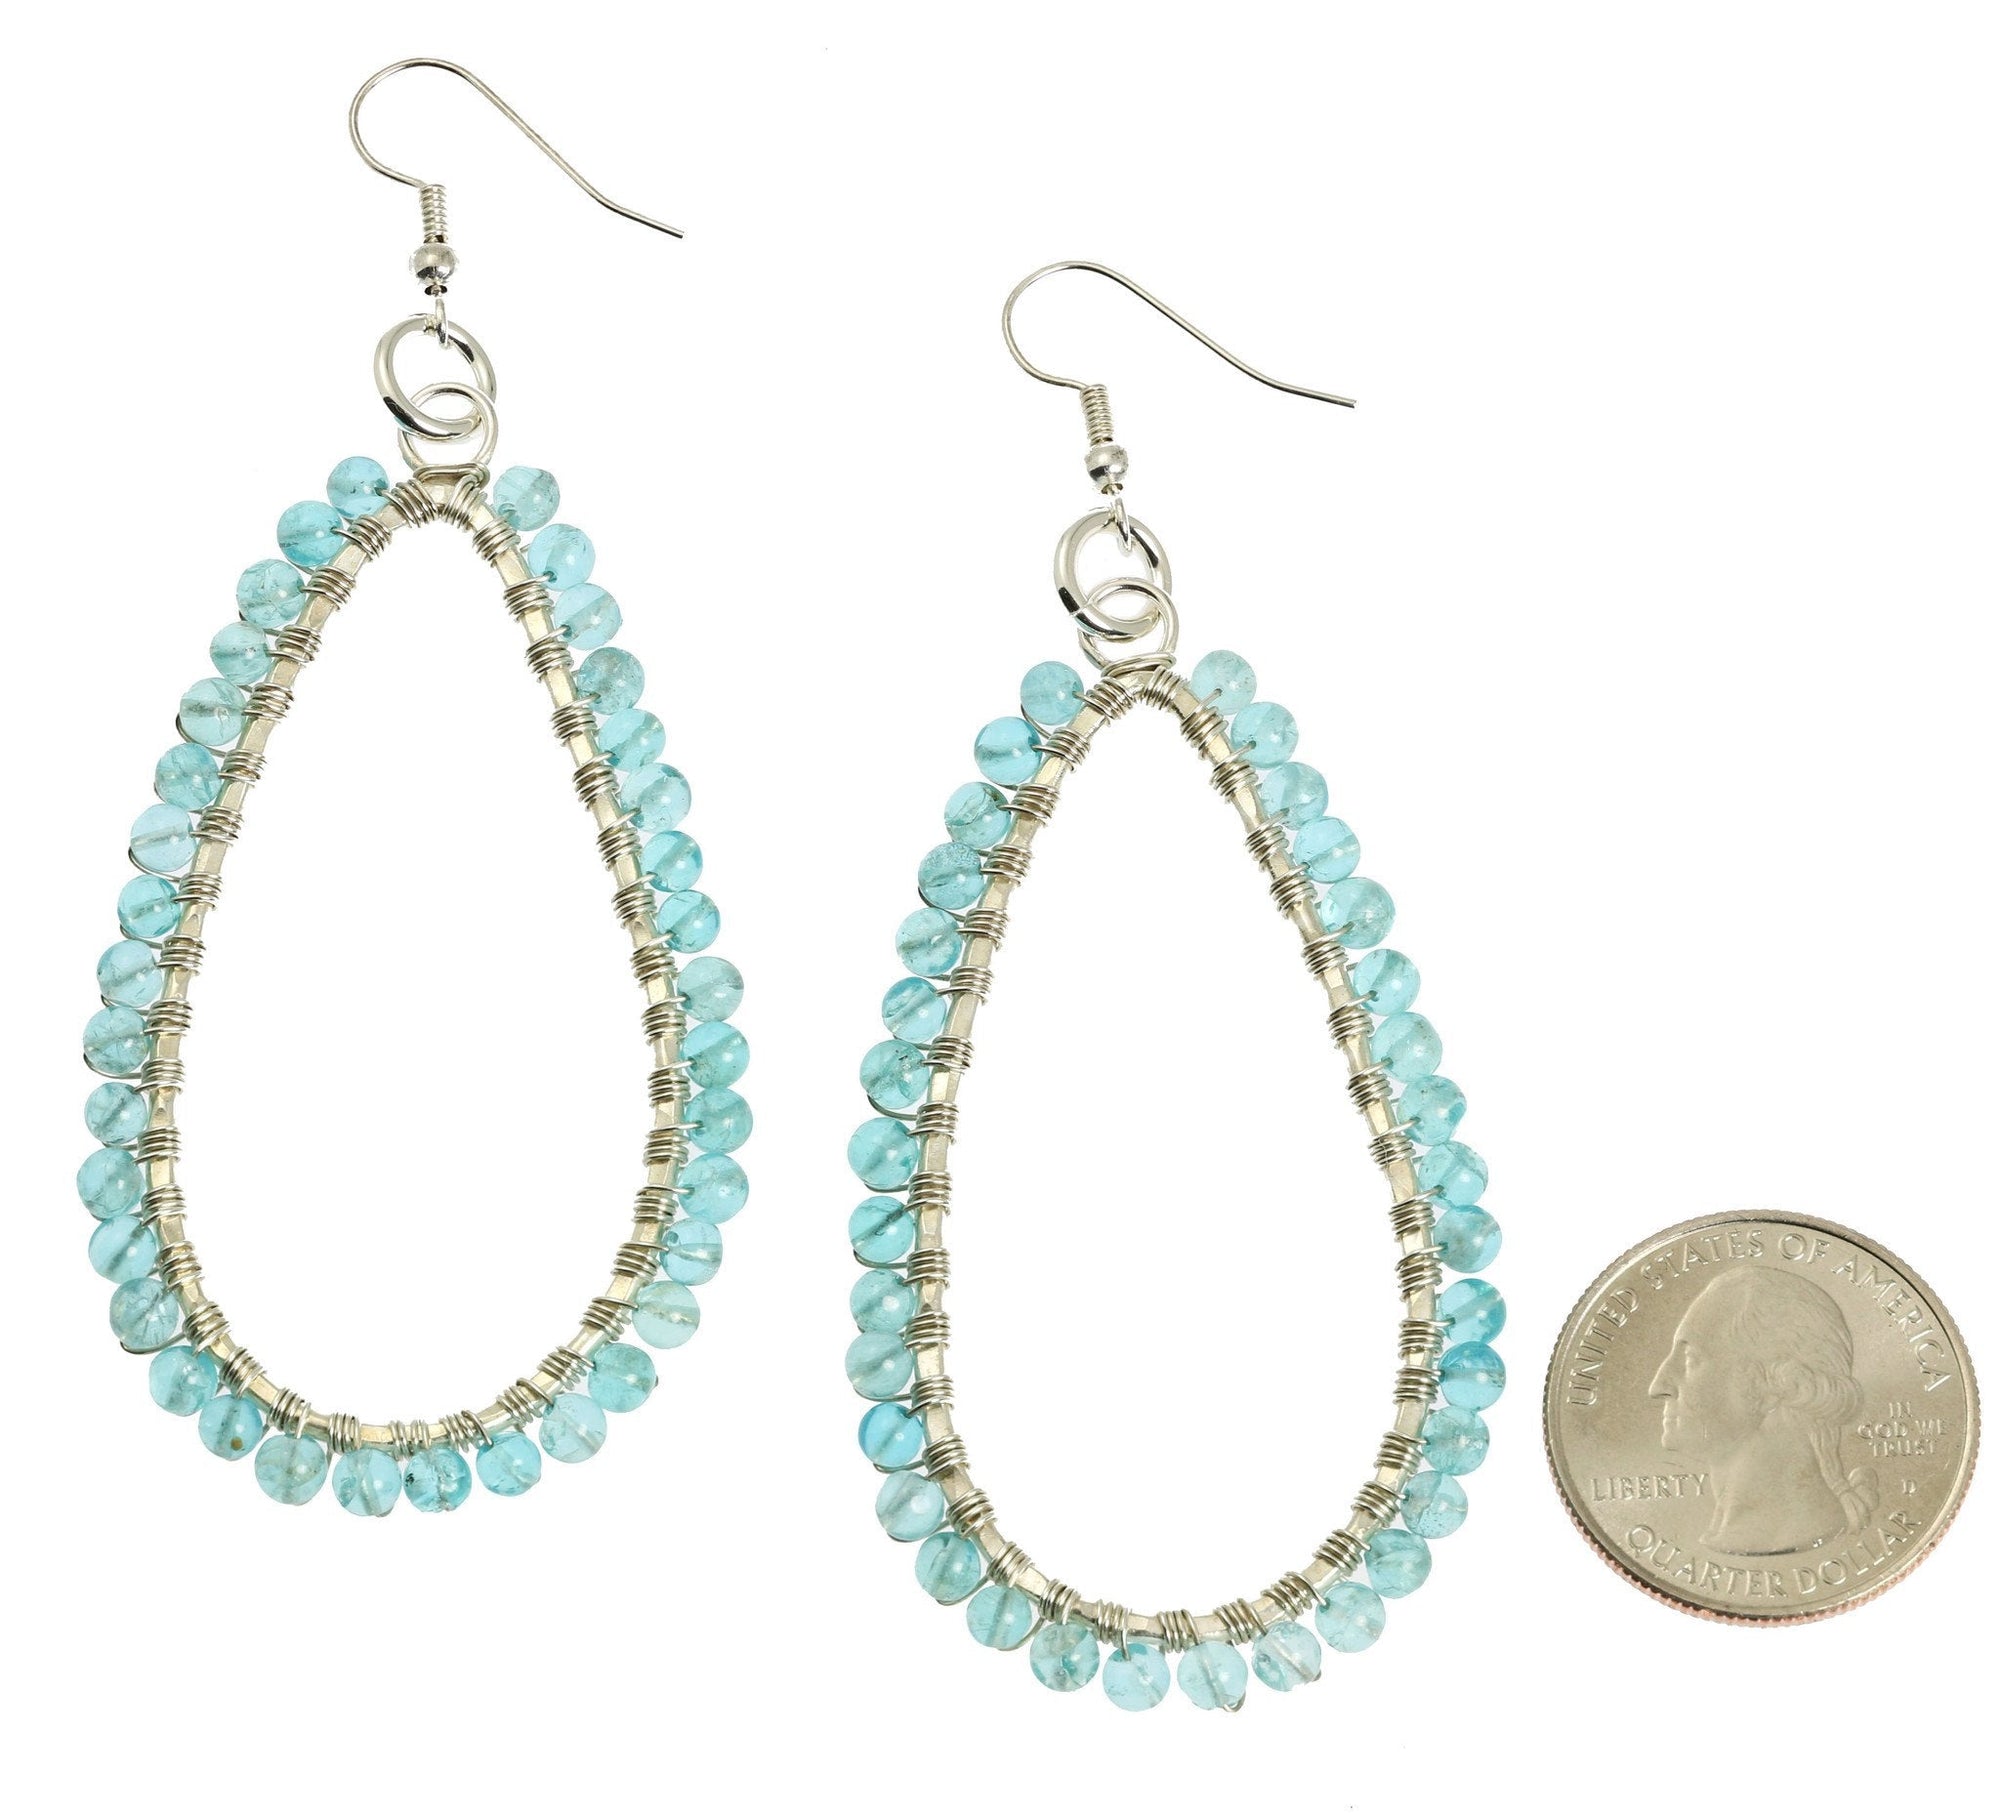 Size of Hammered Silver Drop Earrings with Apatite